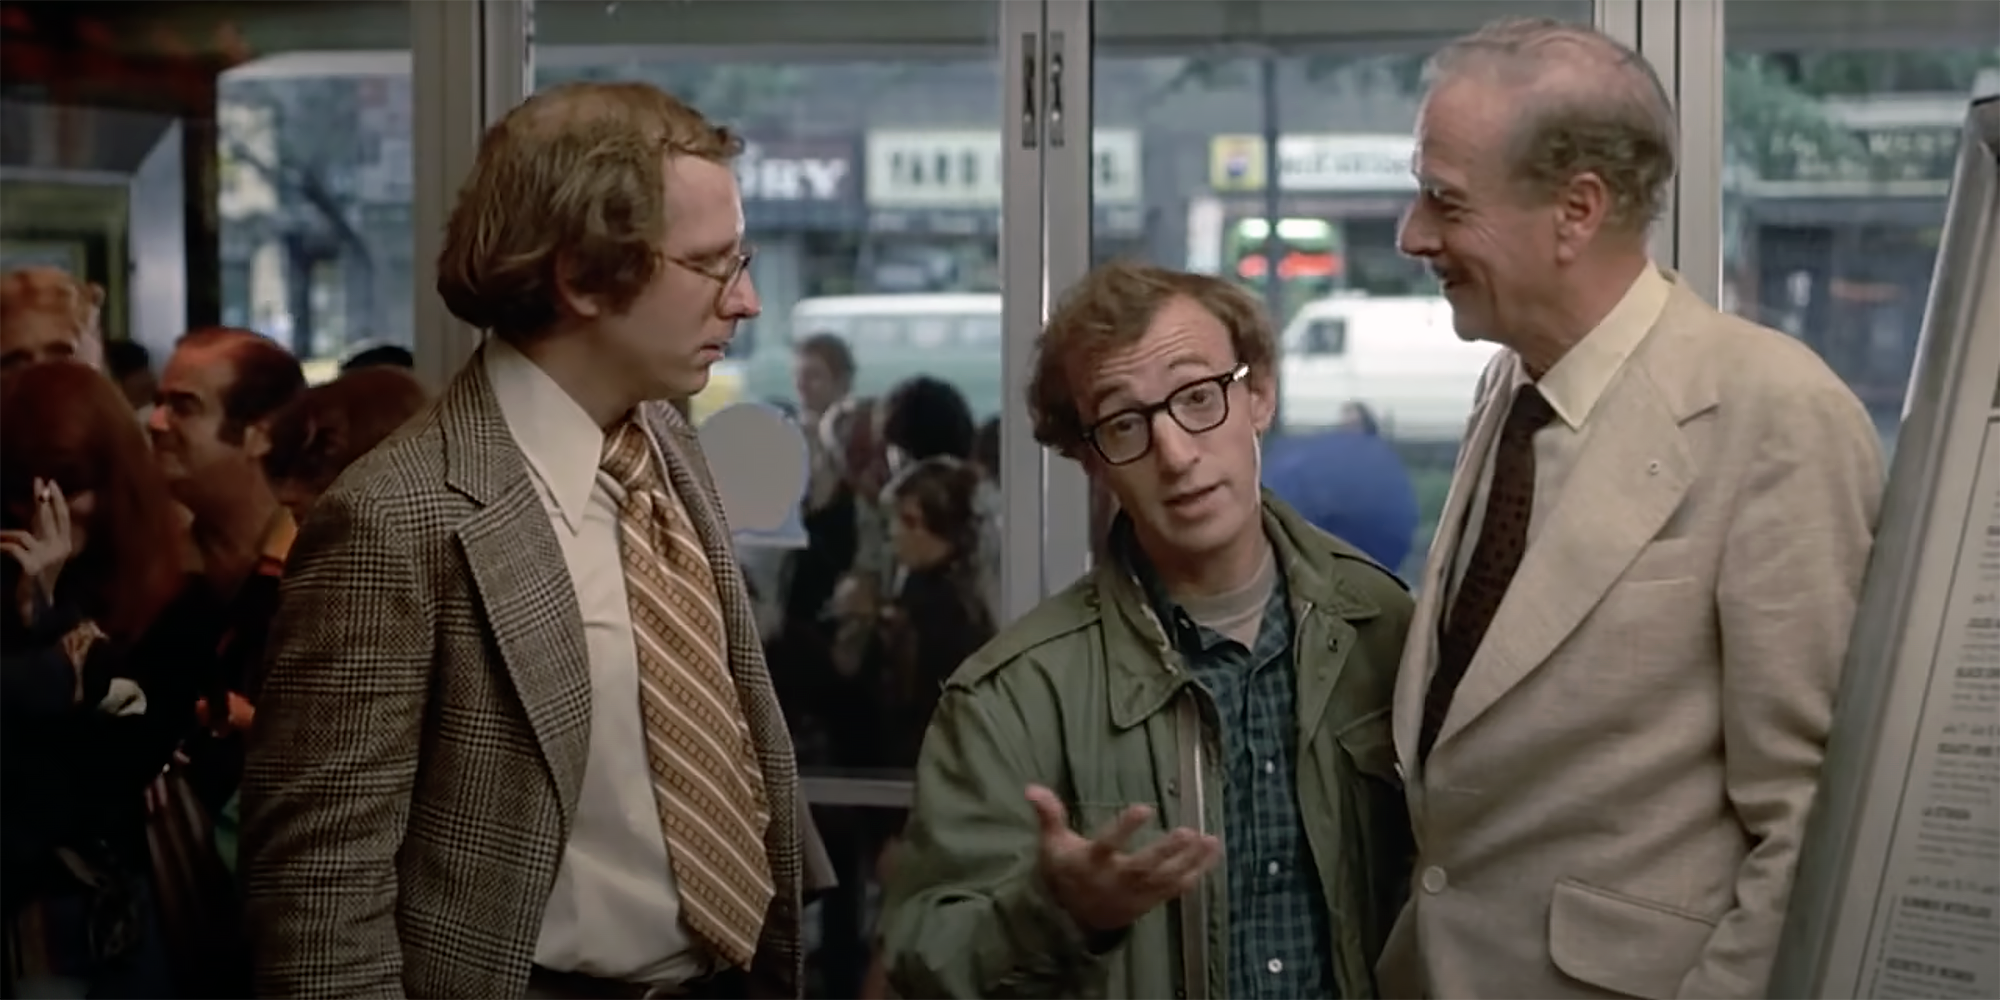 Few filmmakers break the fourth wall more often than Woody Allen, like this scene in Annie Hall.